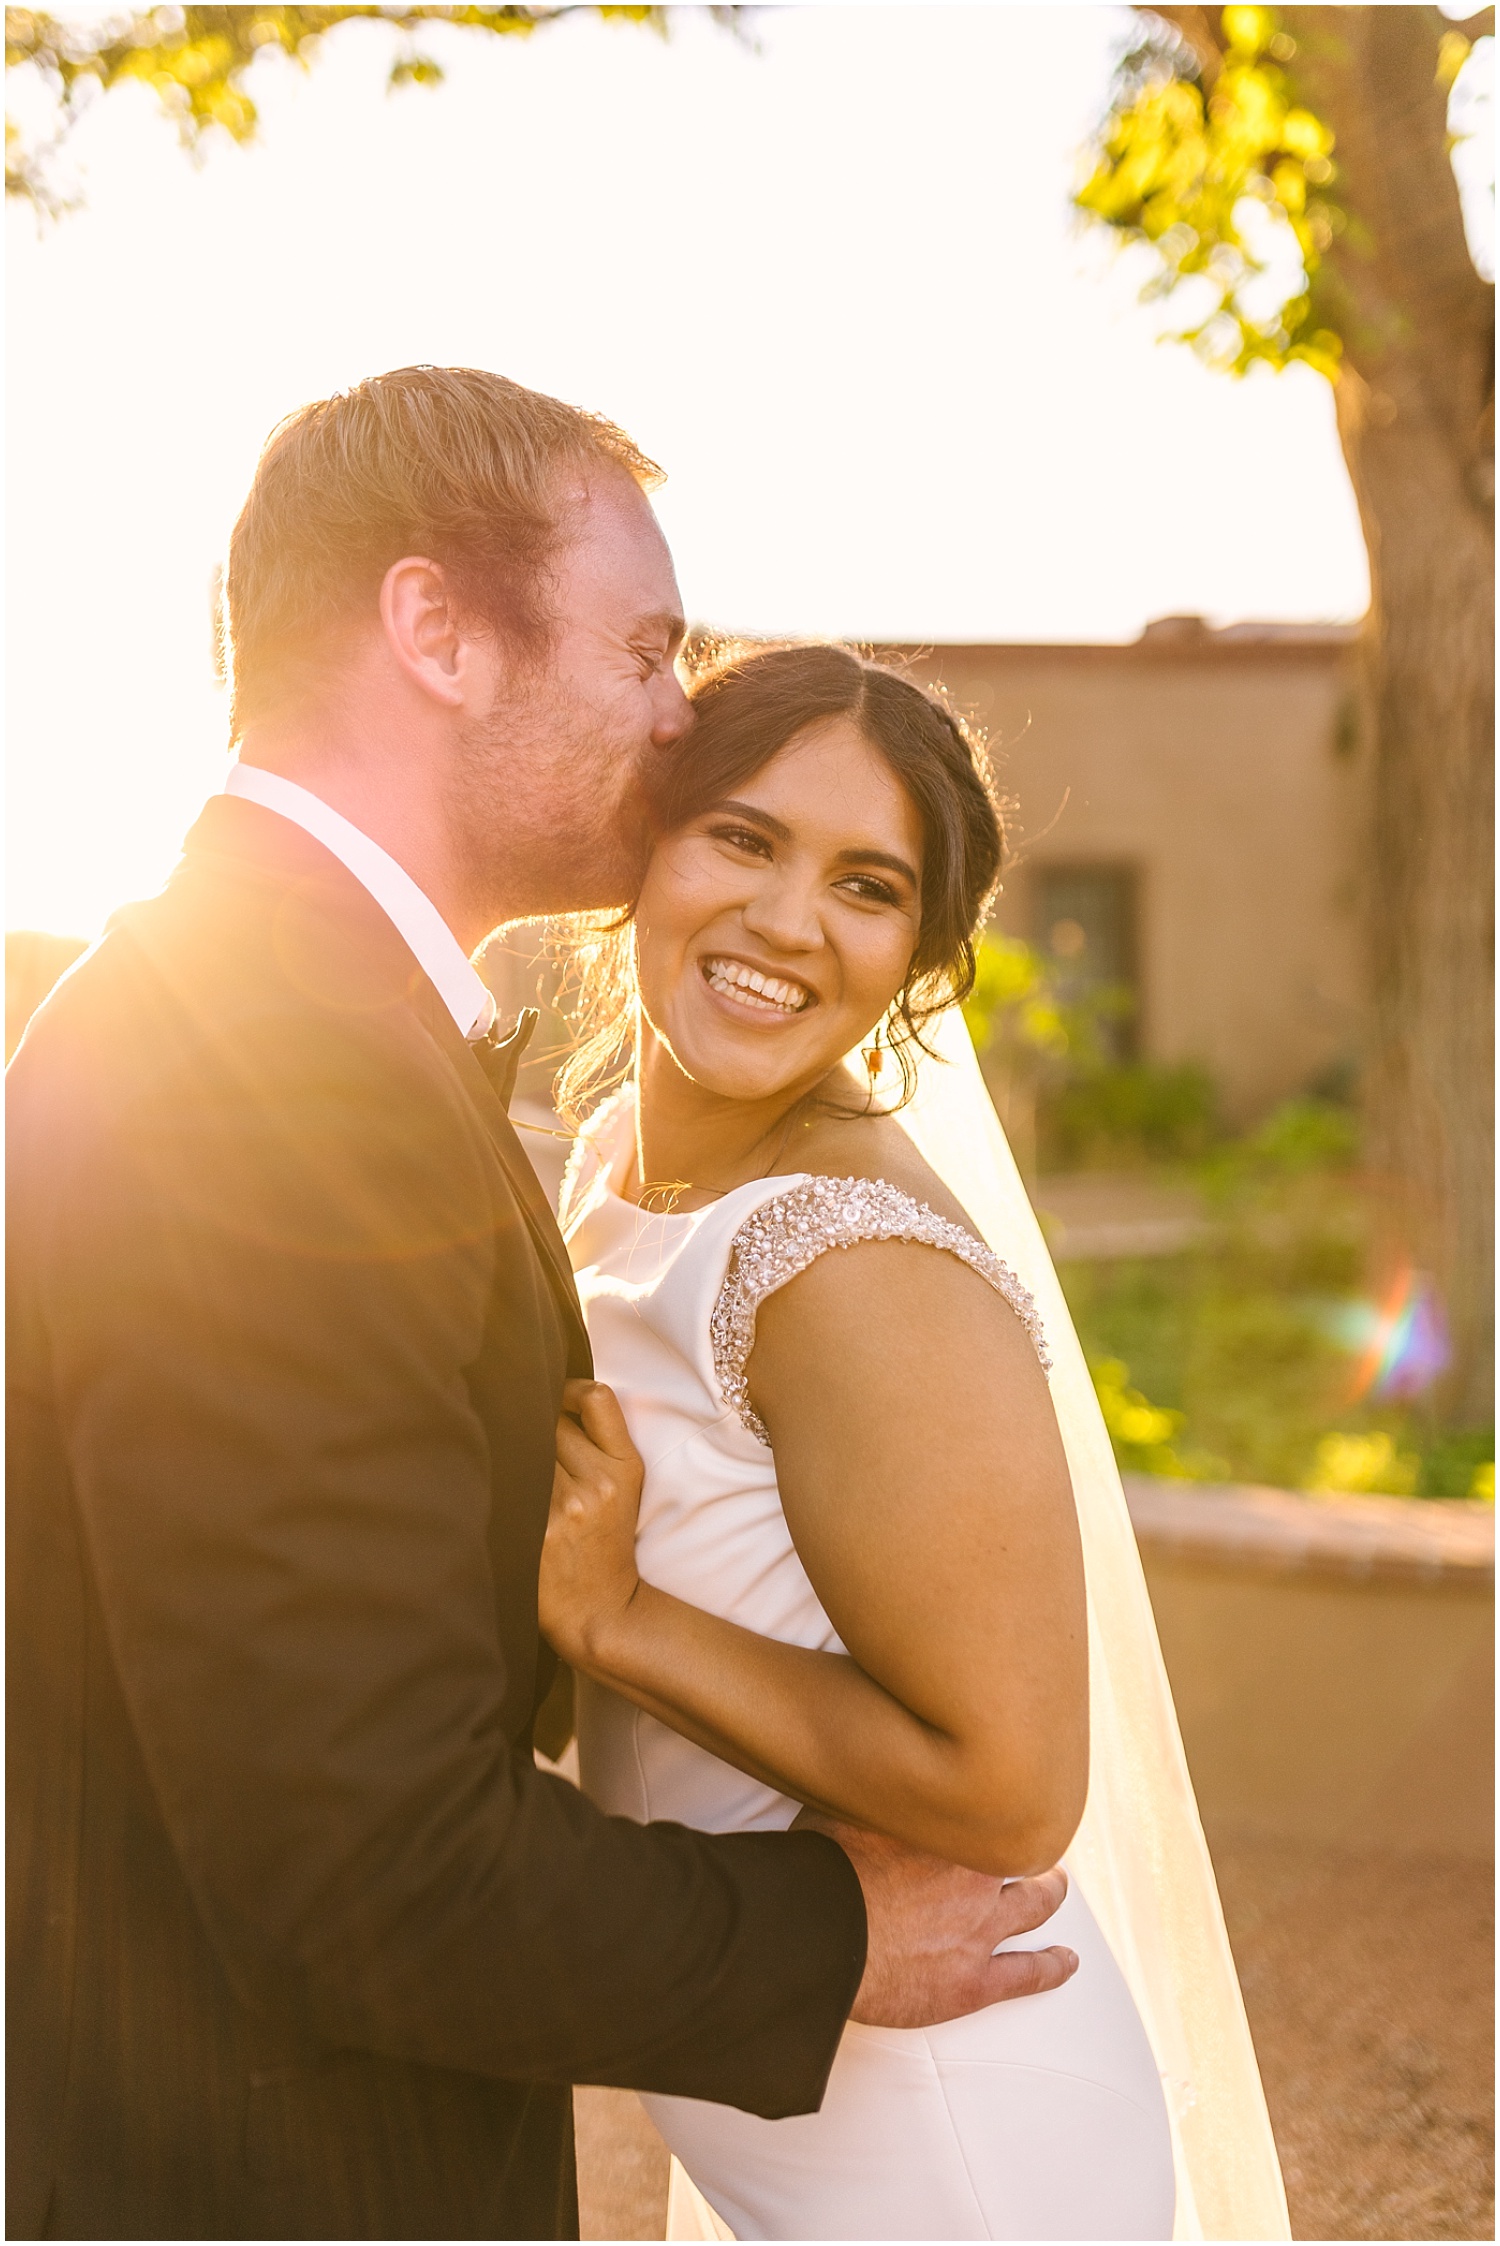 Groom kissing his bride at golden hour in New Mexico wedding